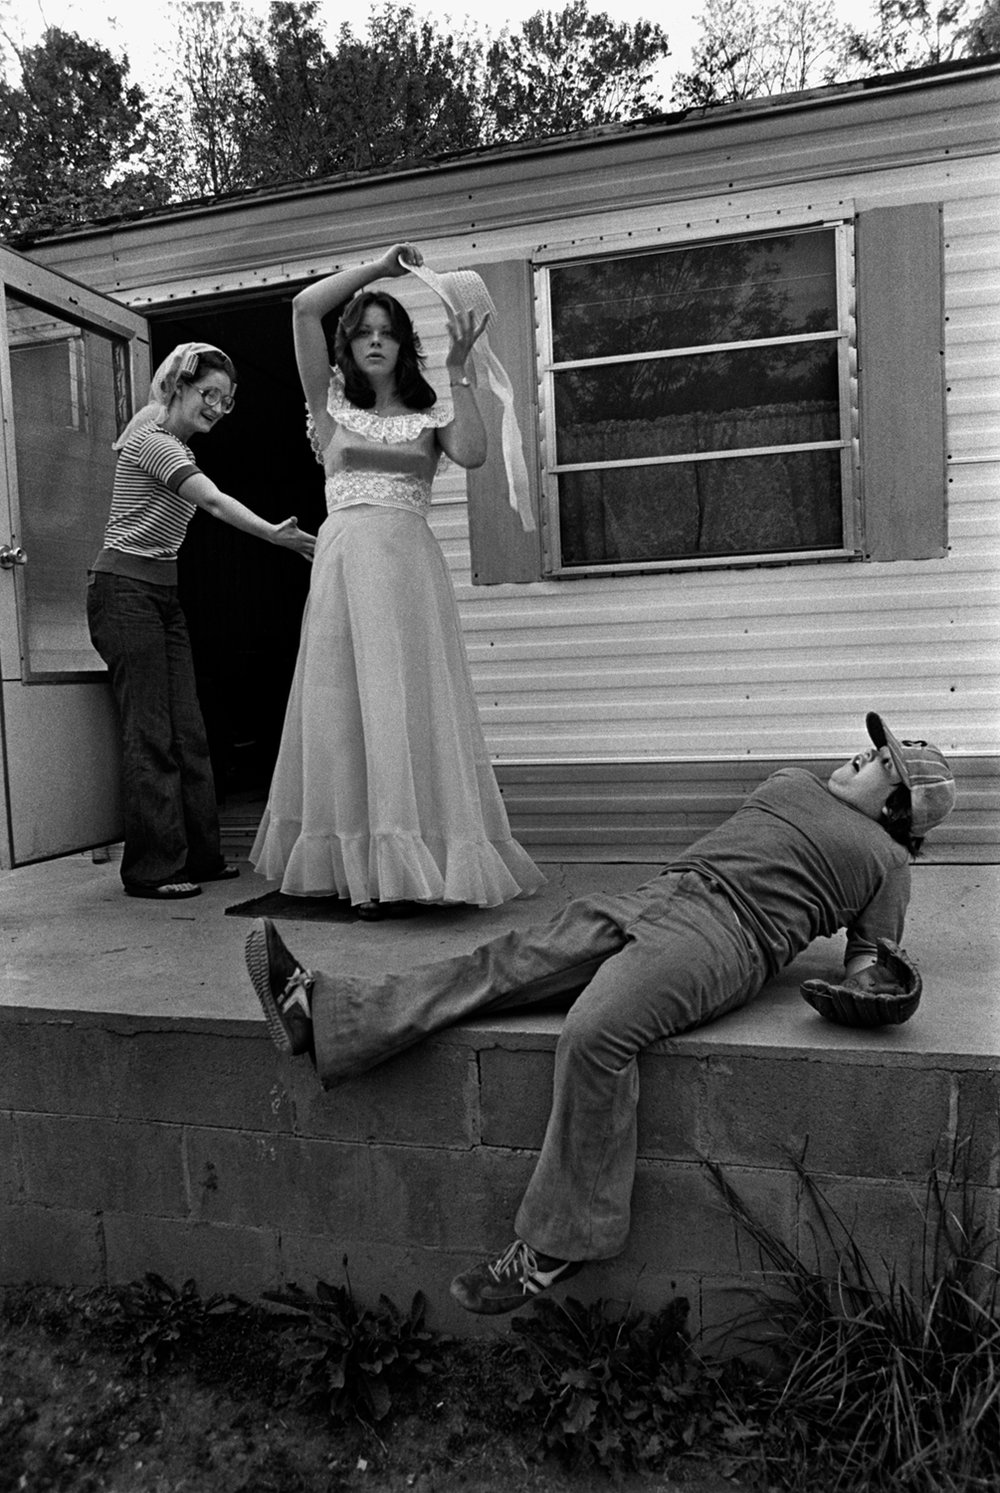   Vicky Ray on Prom Night, Sodom, Madison County, NC  Image: 1977/ printed: 2016 Edition: 3/20 Archival Pigment Print 13 x 8 1/2 in. (image size) The Do Good Fund, Inc., 2016-035 